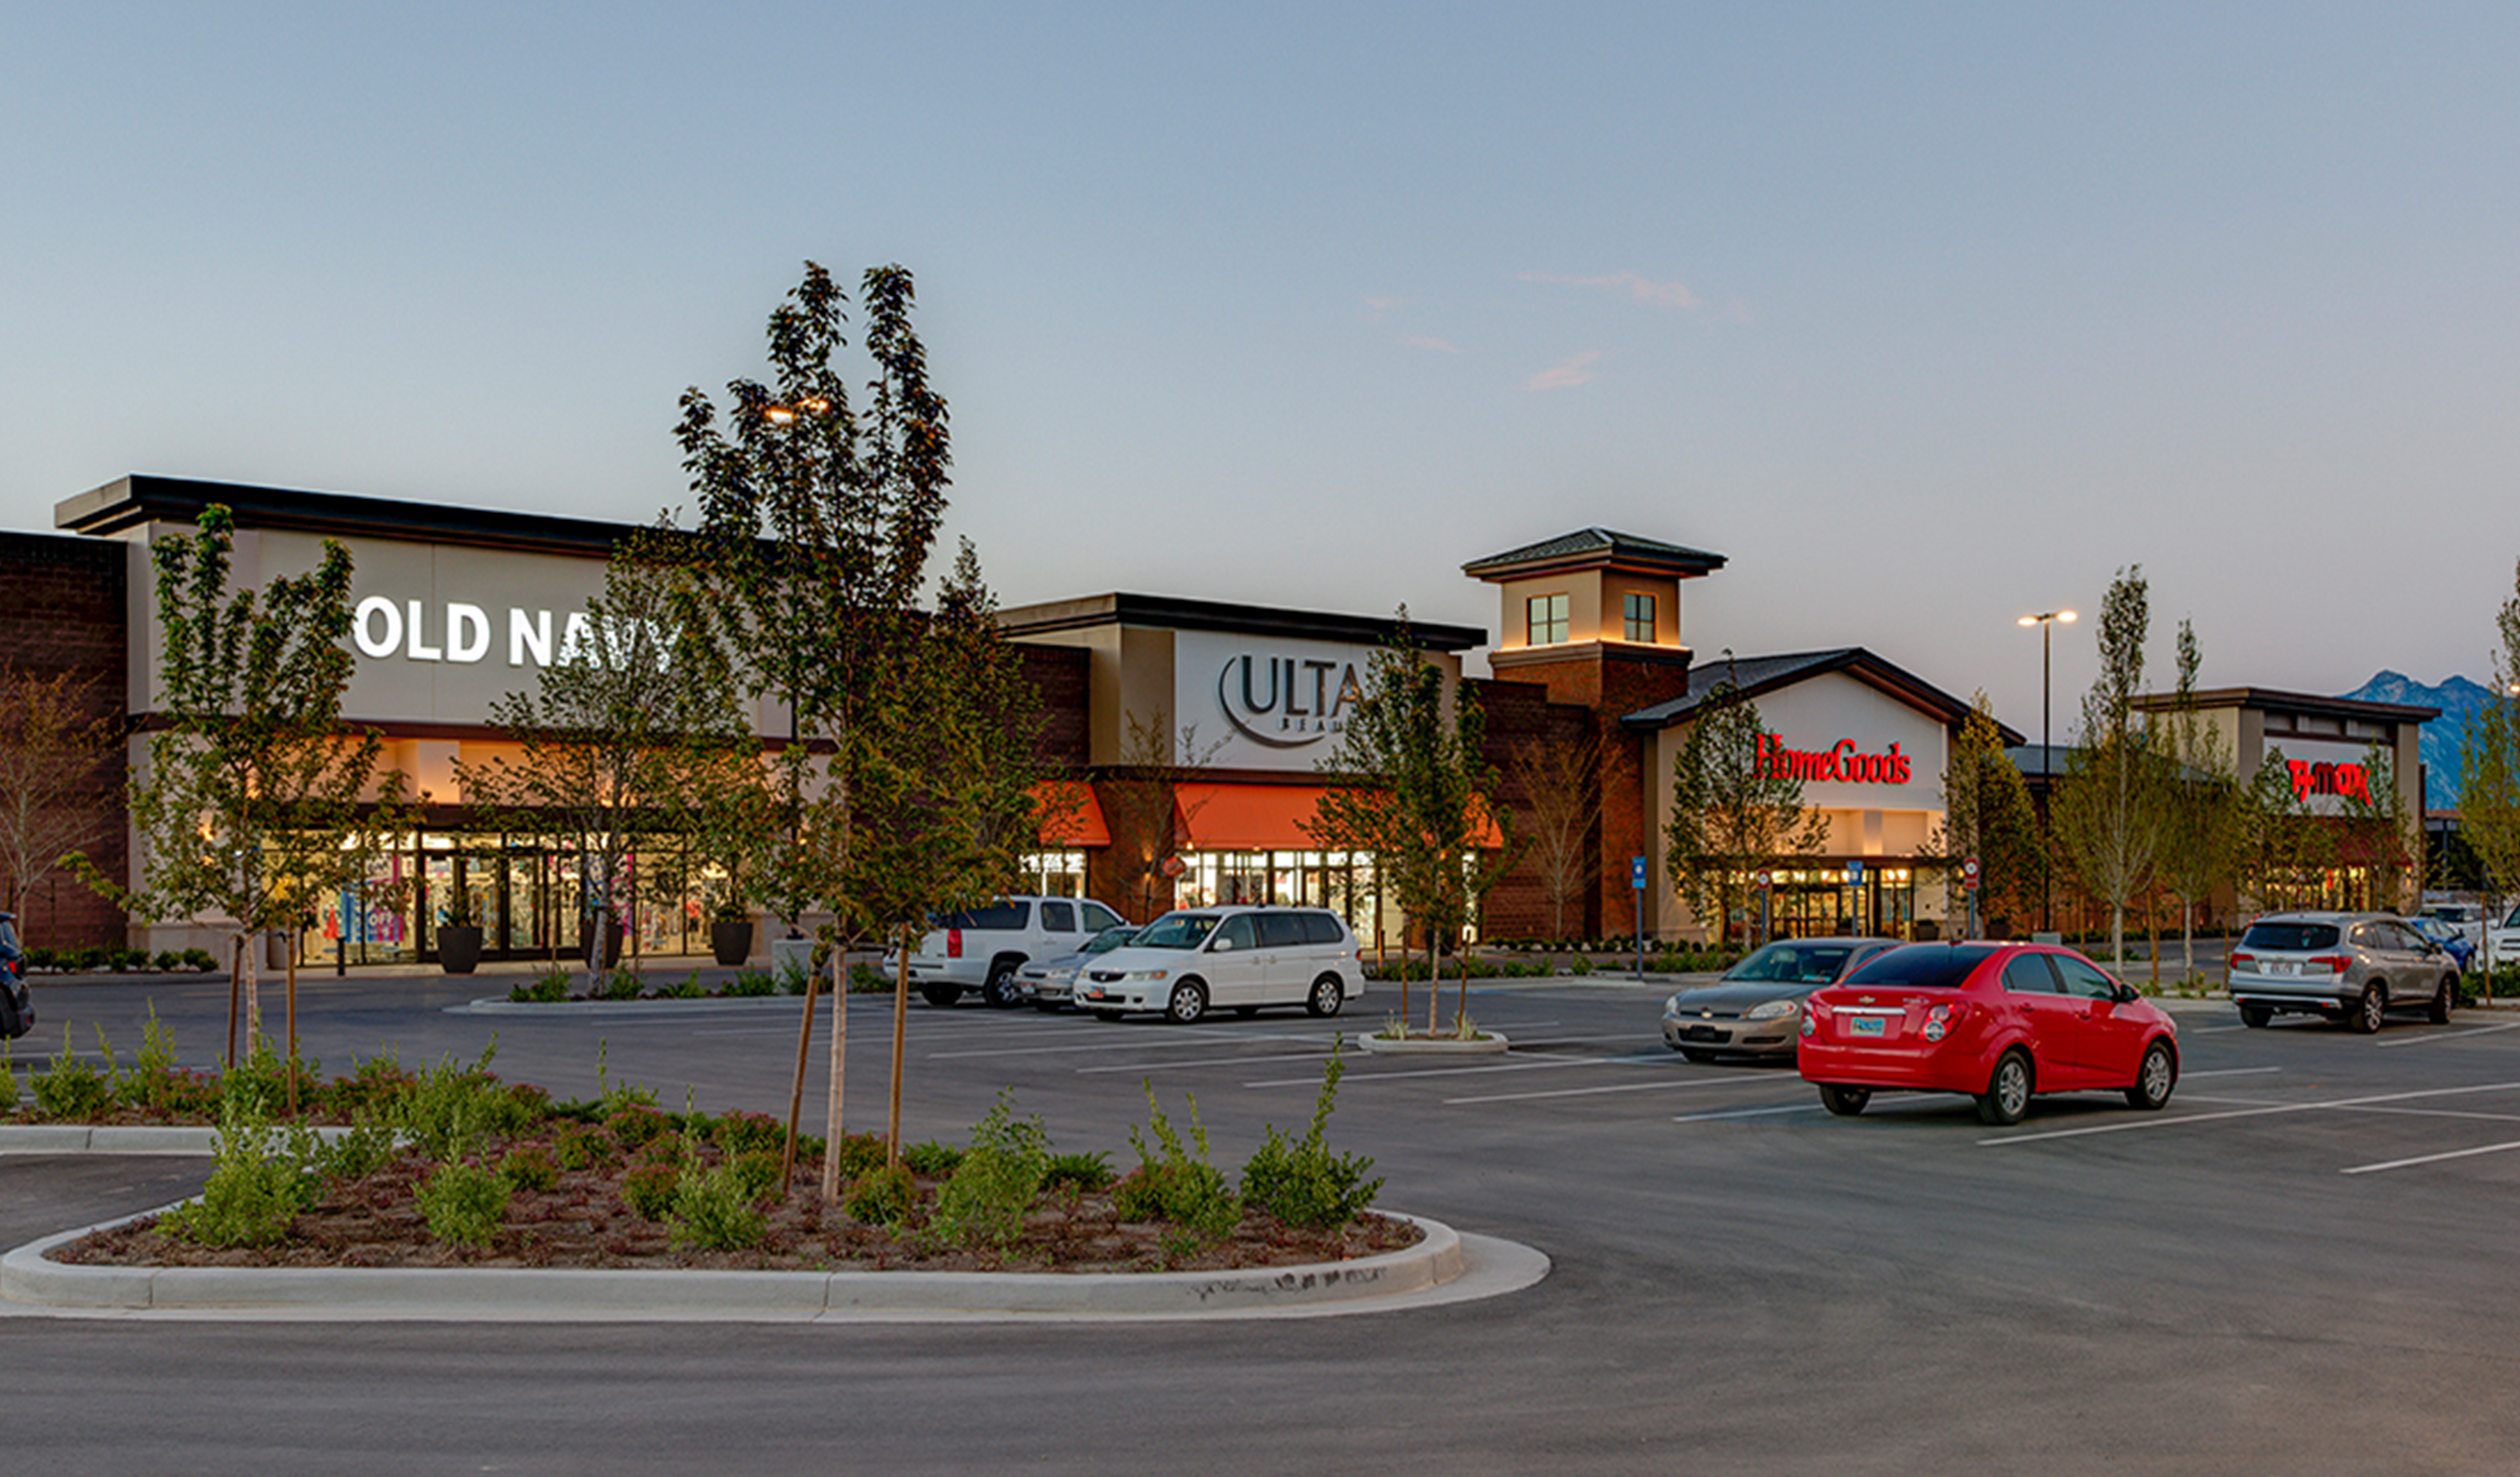 Exterior parking lot view of stores at Mountain View Village